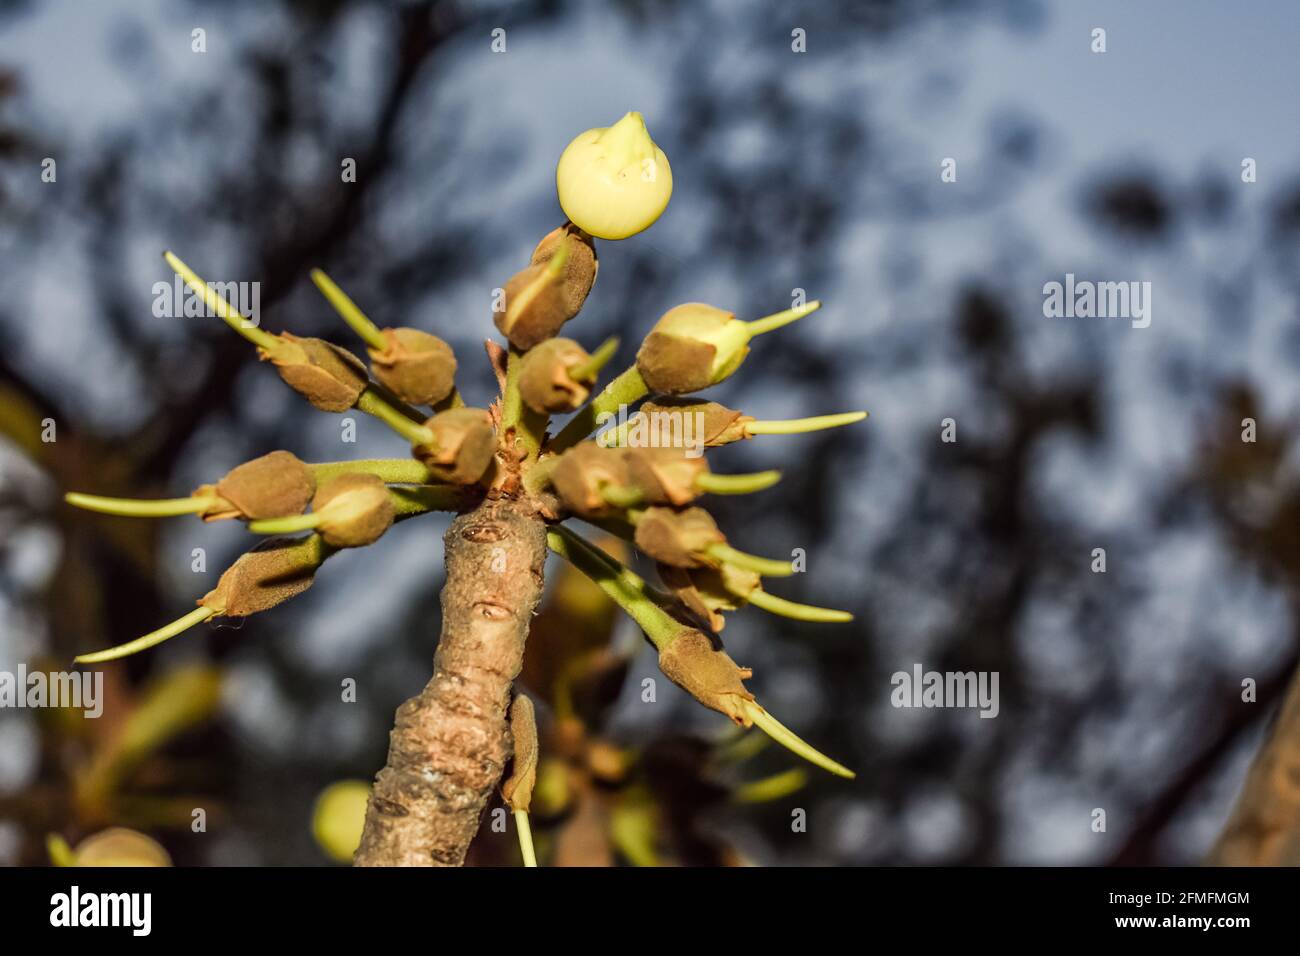 madhuca Longifolia flower bud in the tree branches wild natural foods. Stock Photo